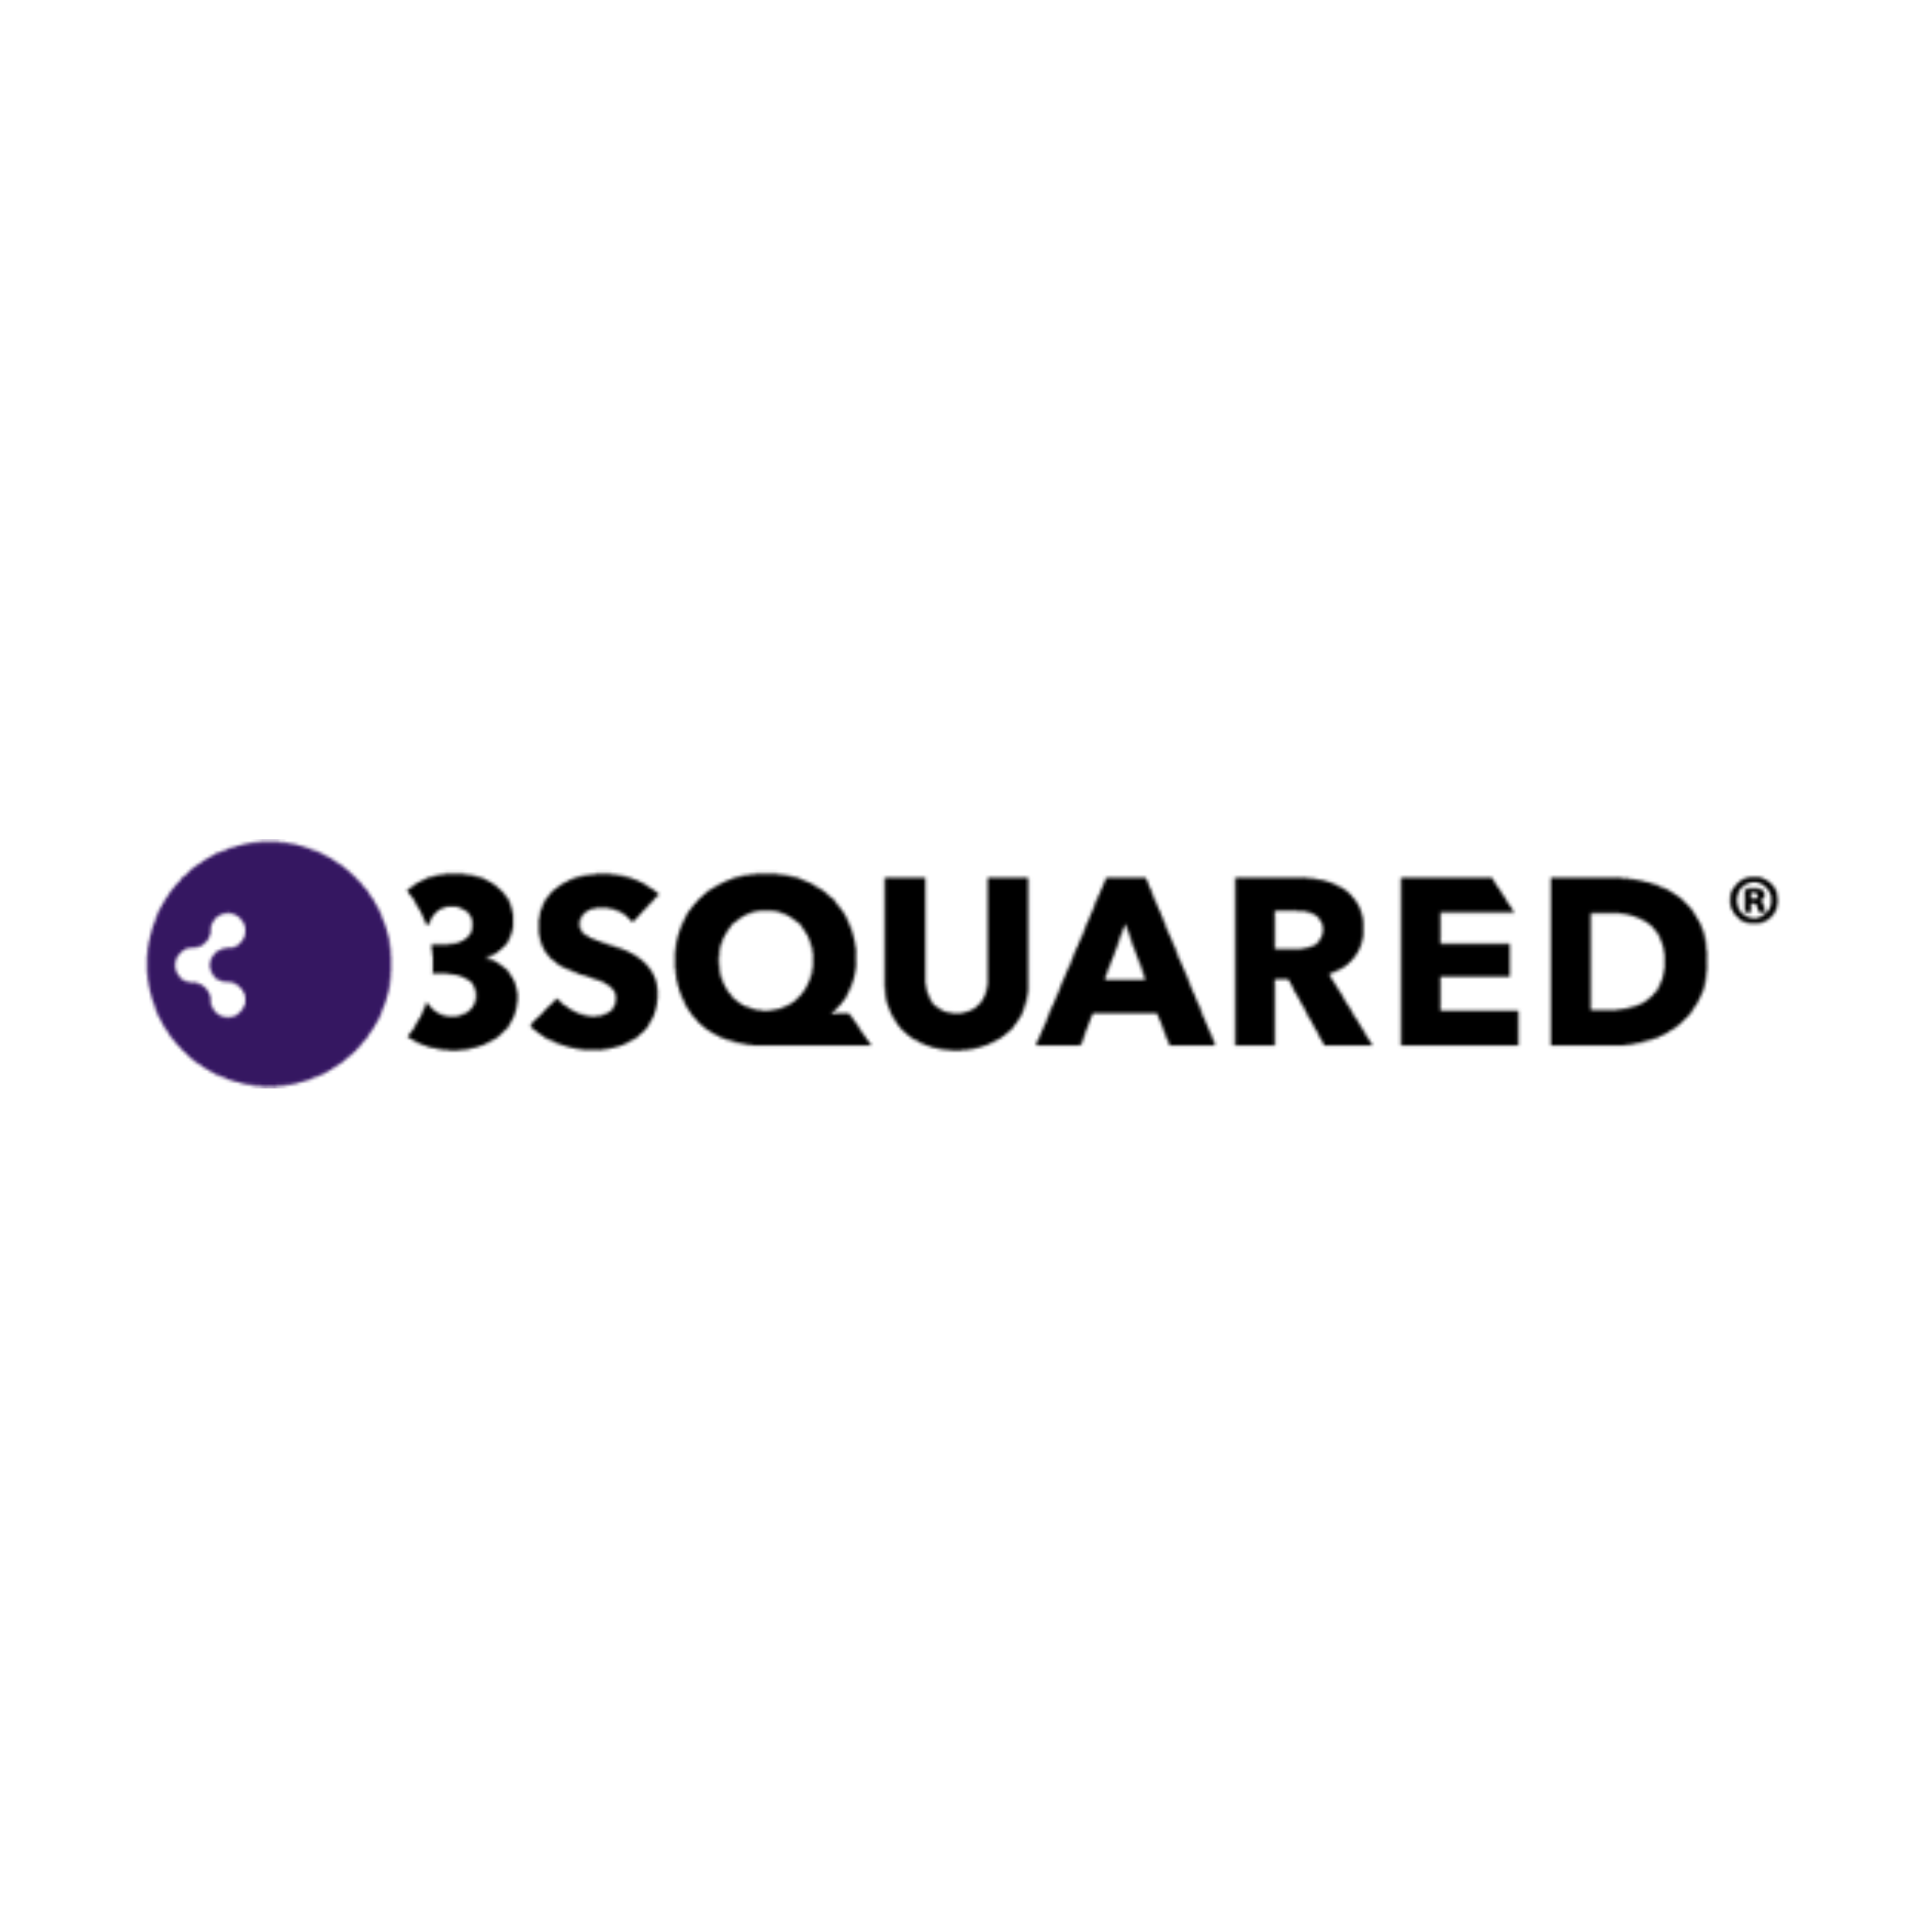 Claire Booth Joins Rail Technology Consultancy 3Squared